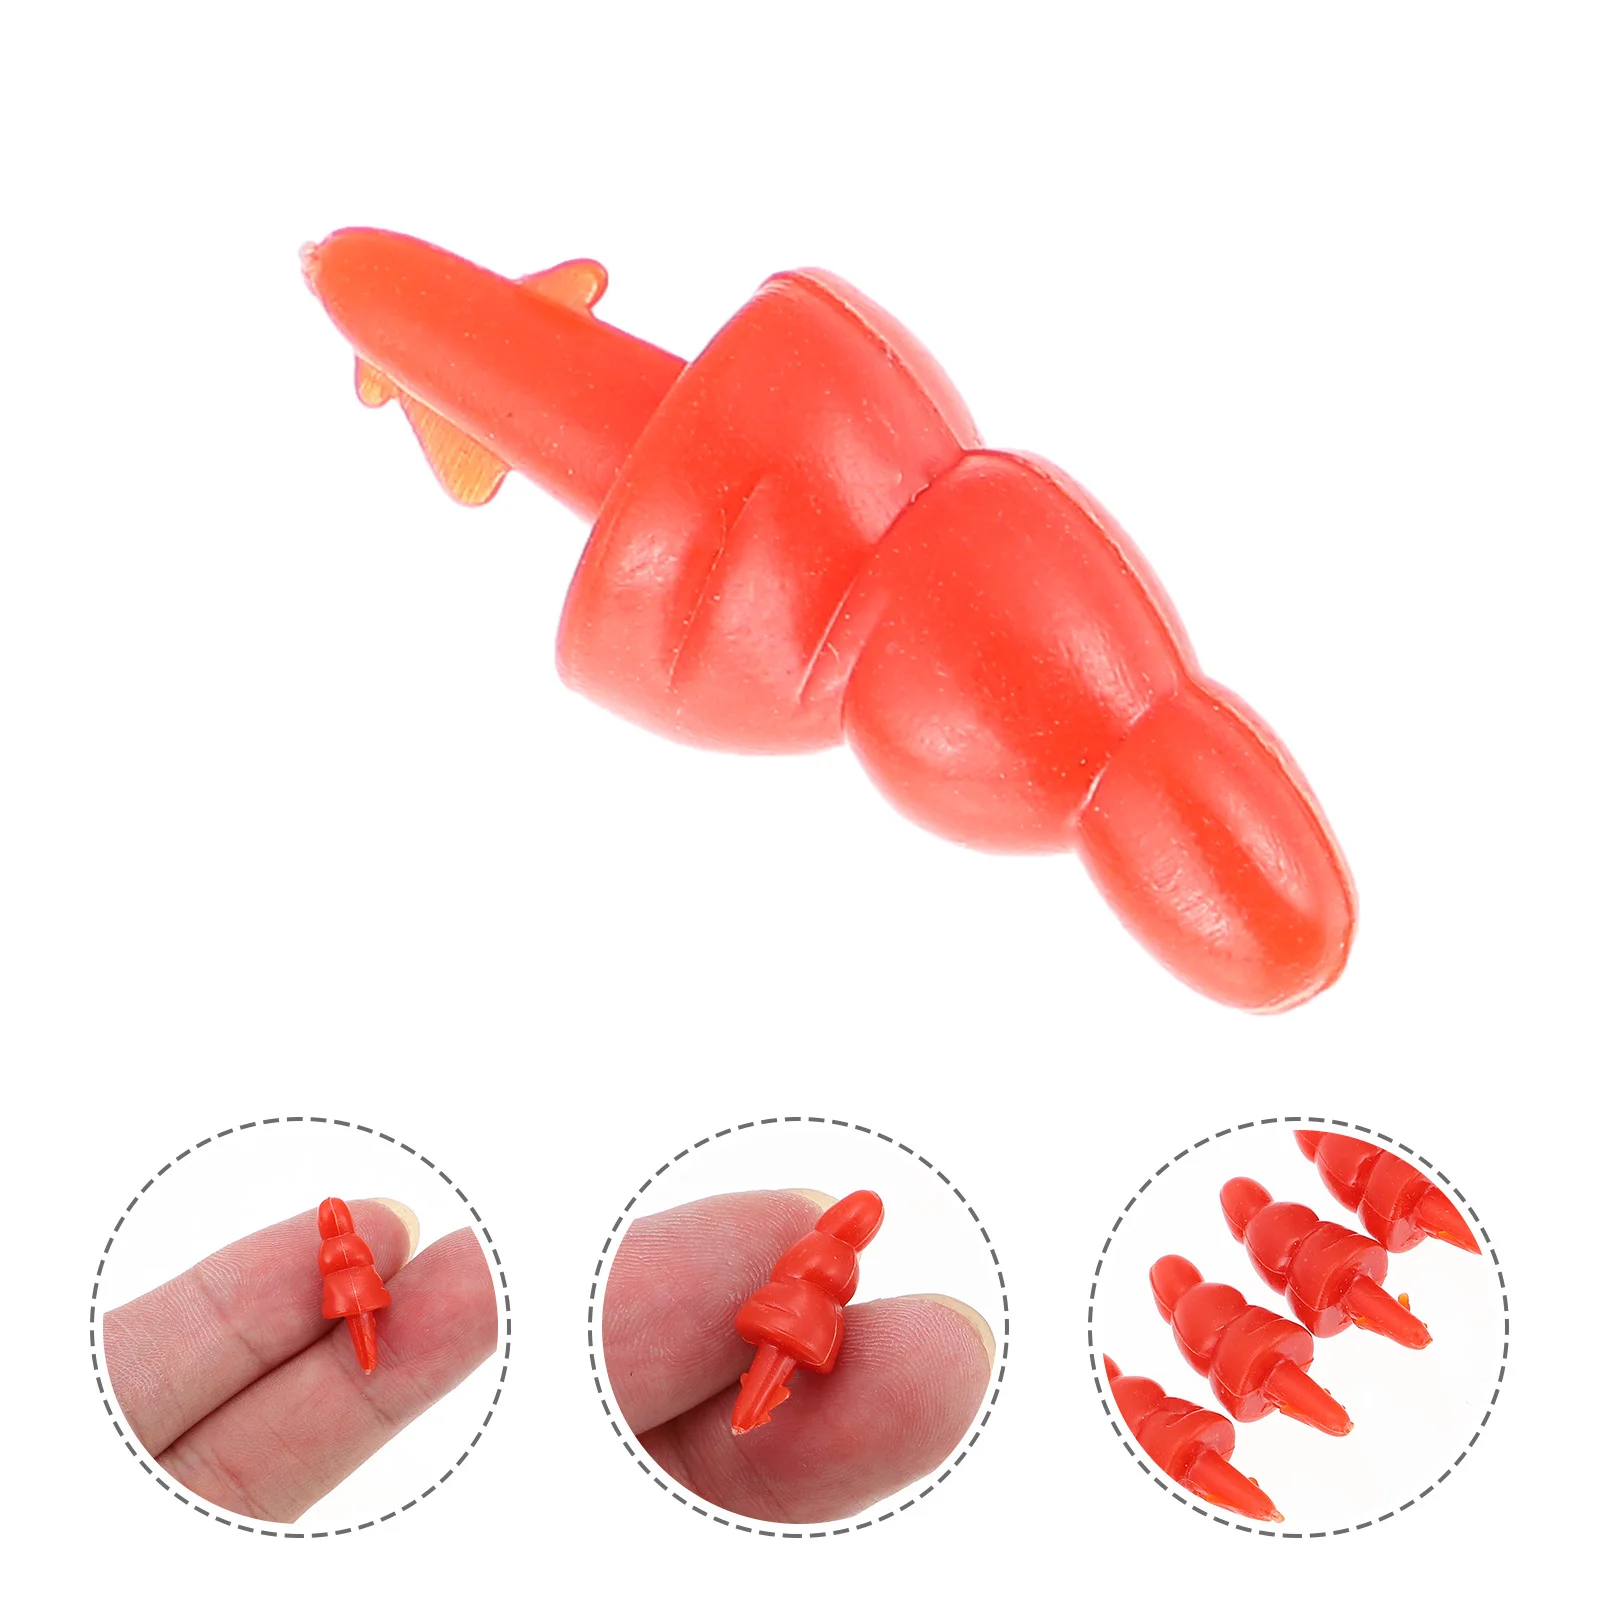 

Snowman Nose Noses Carrotdiy Toycrafts Craft Mini Accessories Carrots Safety Making Winter Christmas Supplies Ornament Kit Red